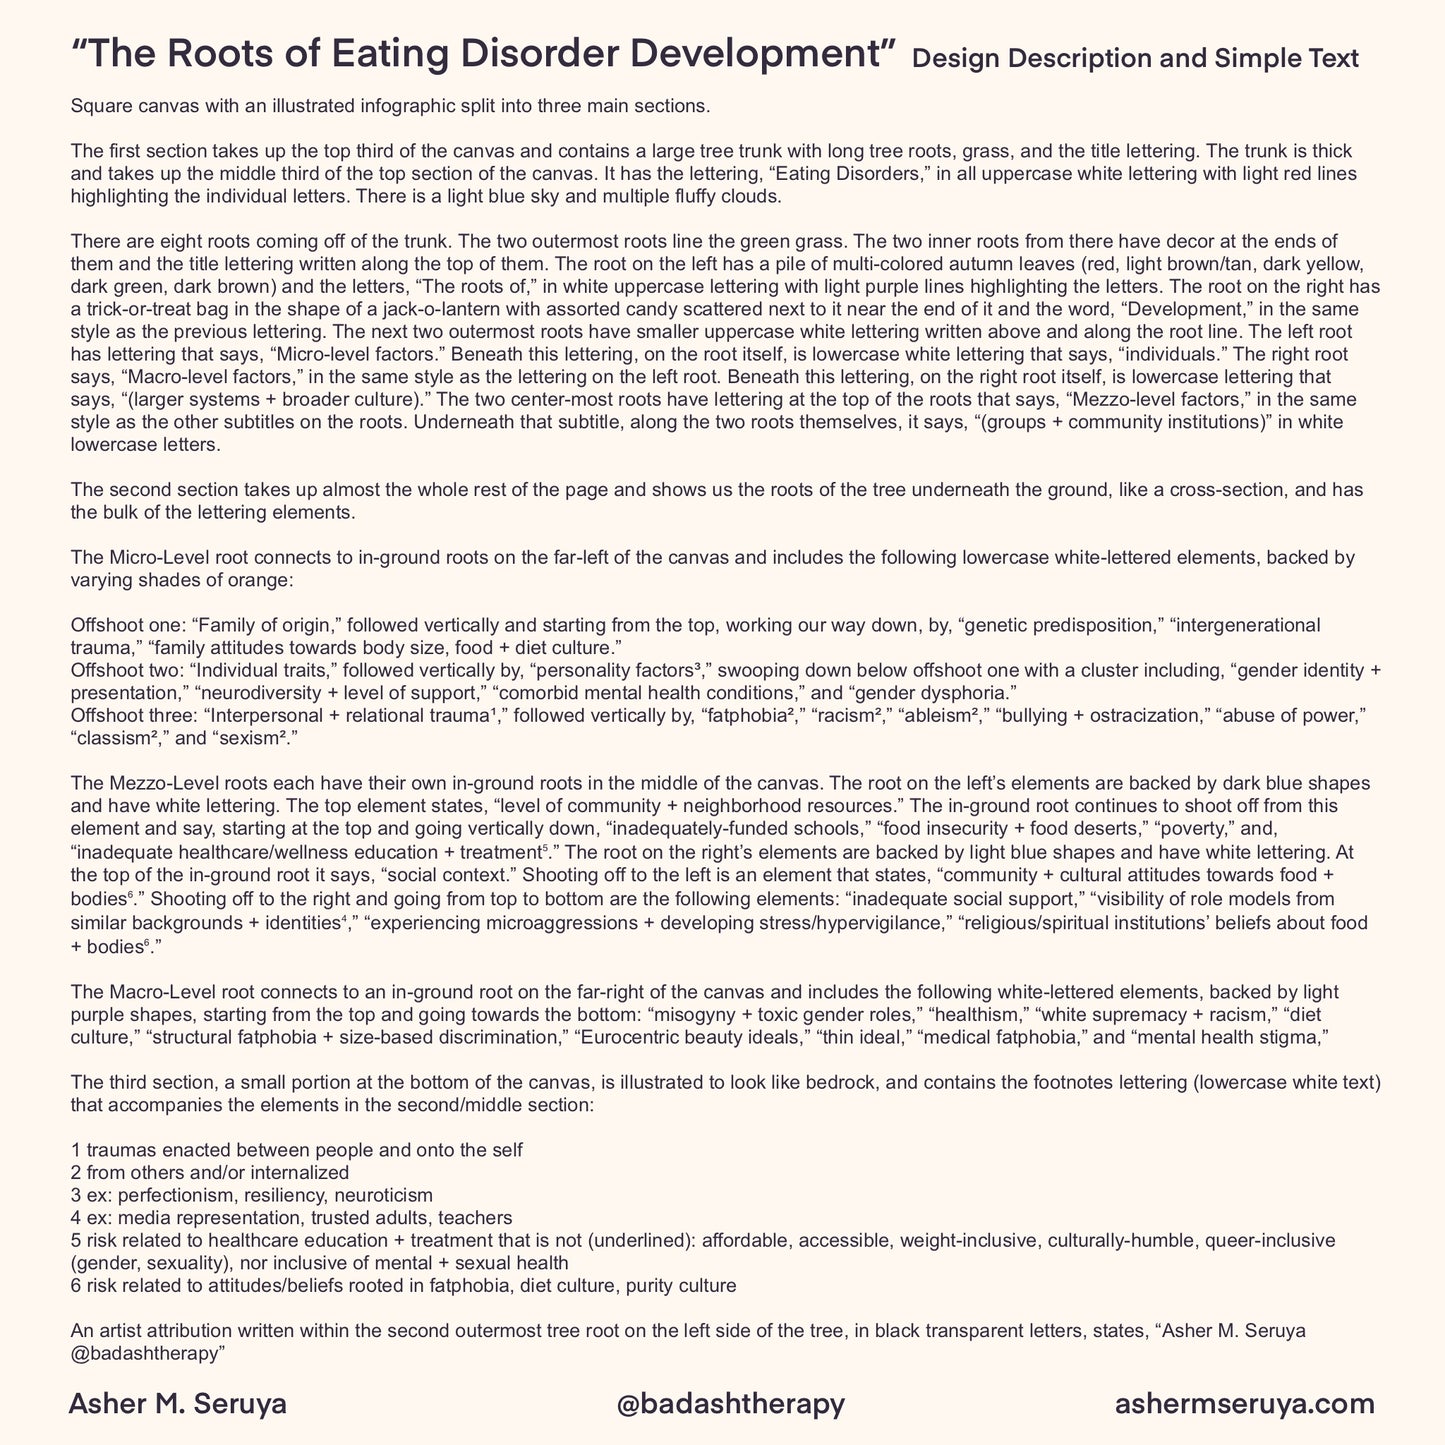 The Roots of Eating Disorder Development - Illustrated Infographic